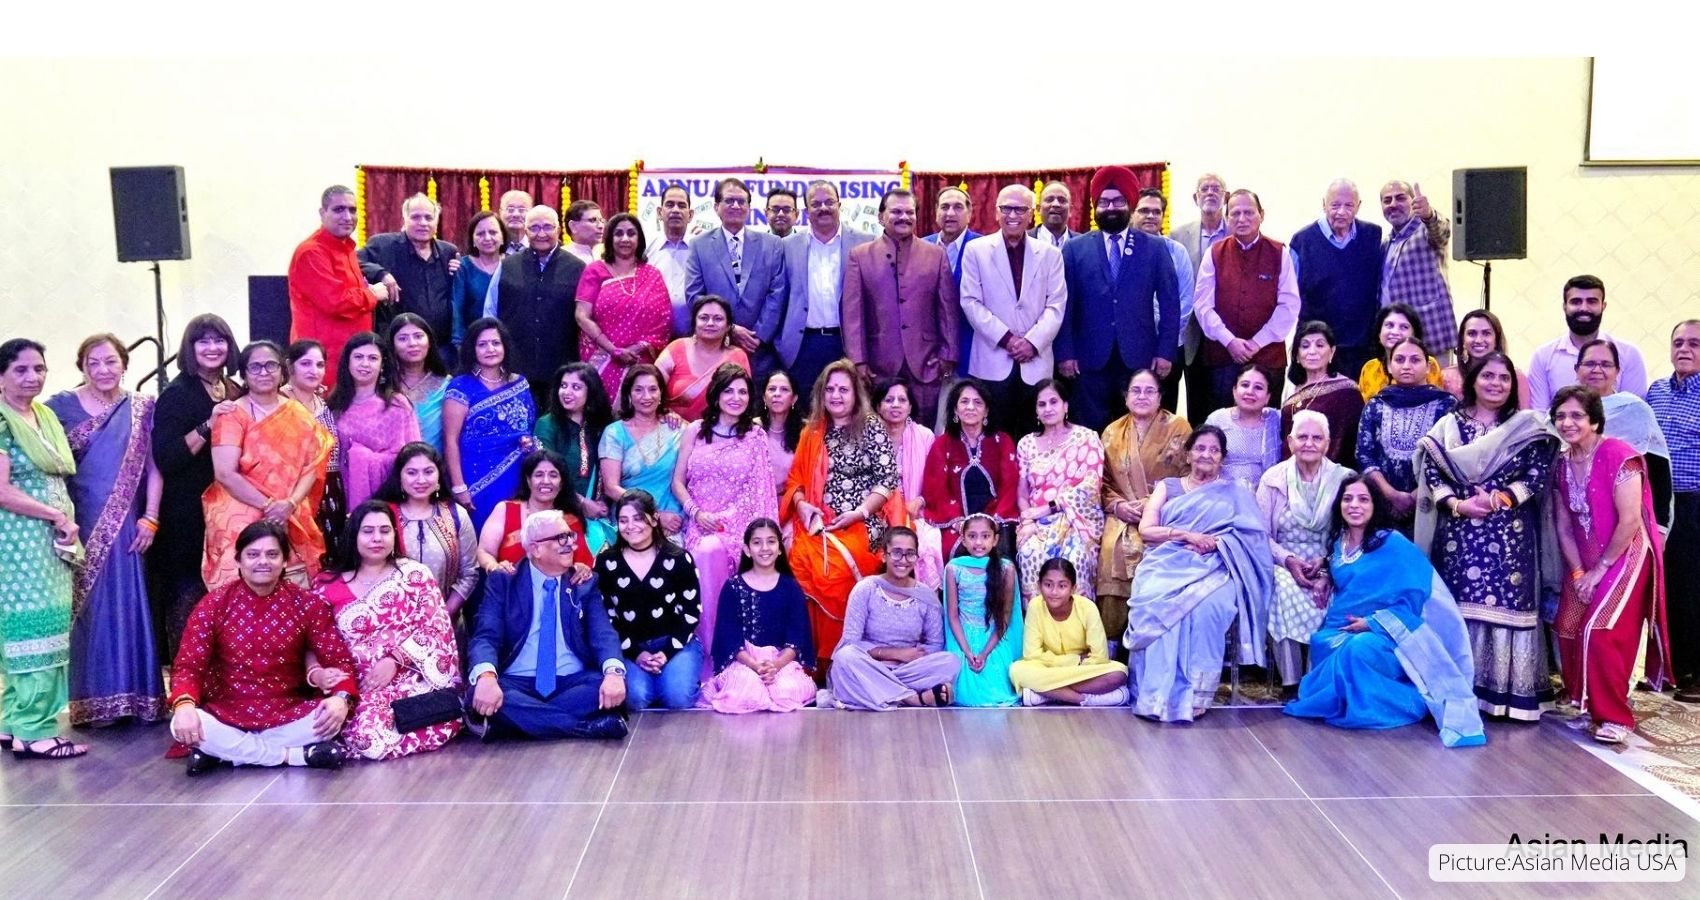 Hari Om Mandir Fundraiser For Community Services, Future Expansion Projects Held